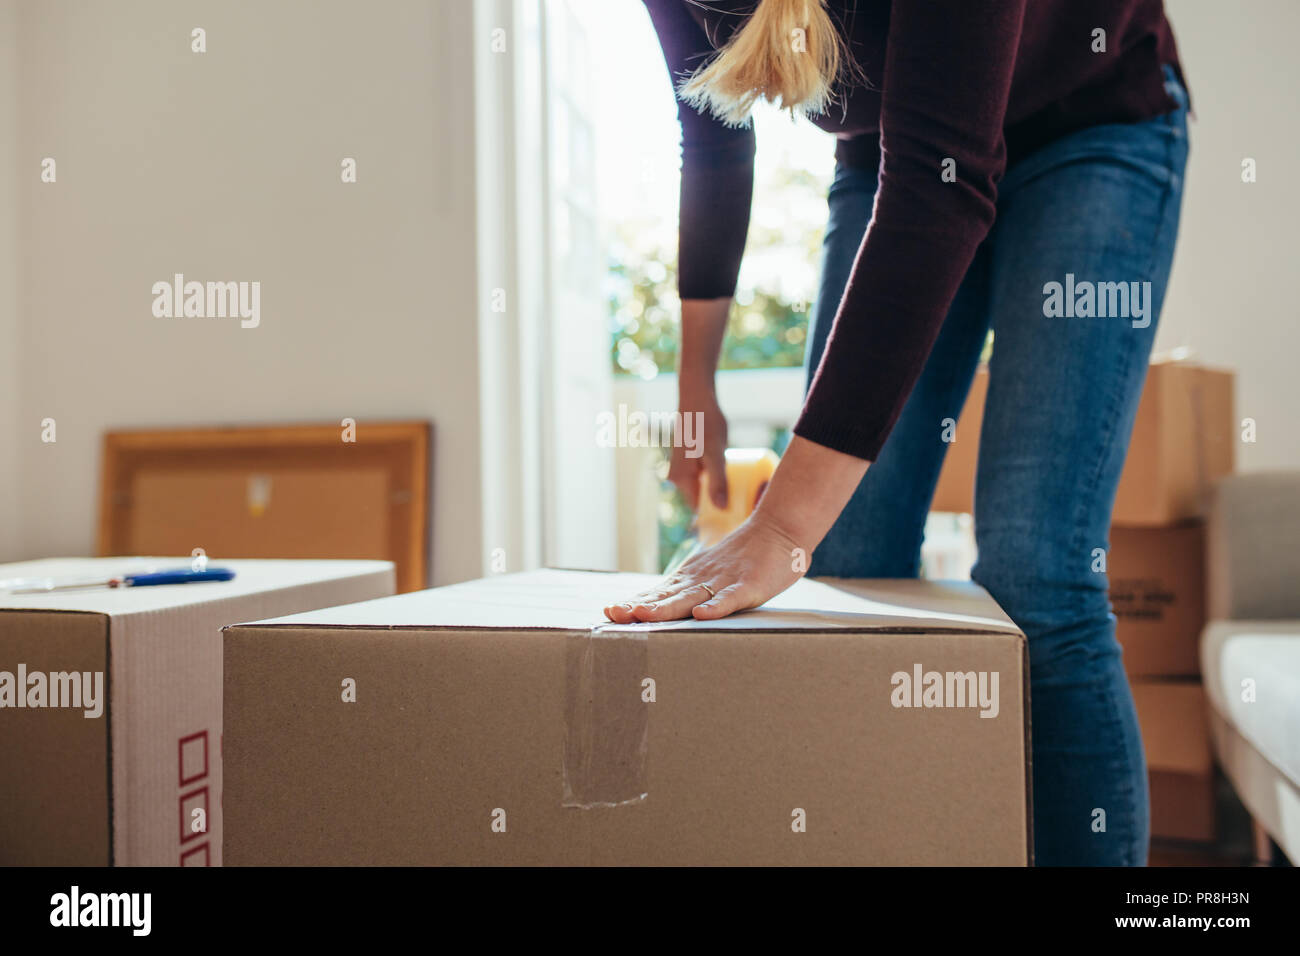 Woman using adhesive tape to seal the packing boxes. Woman moving out to a new home packing household stuff in packing boxes. Stock Photo